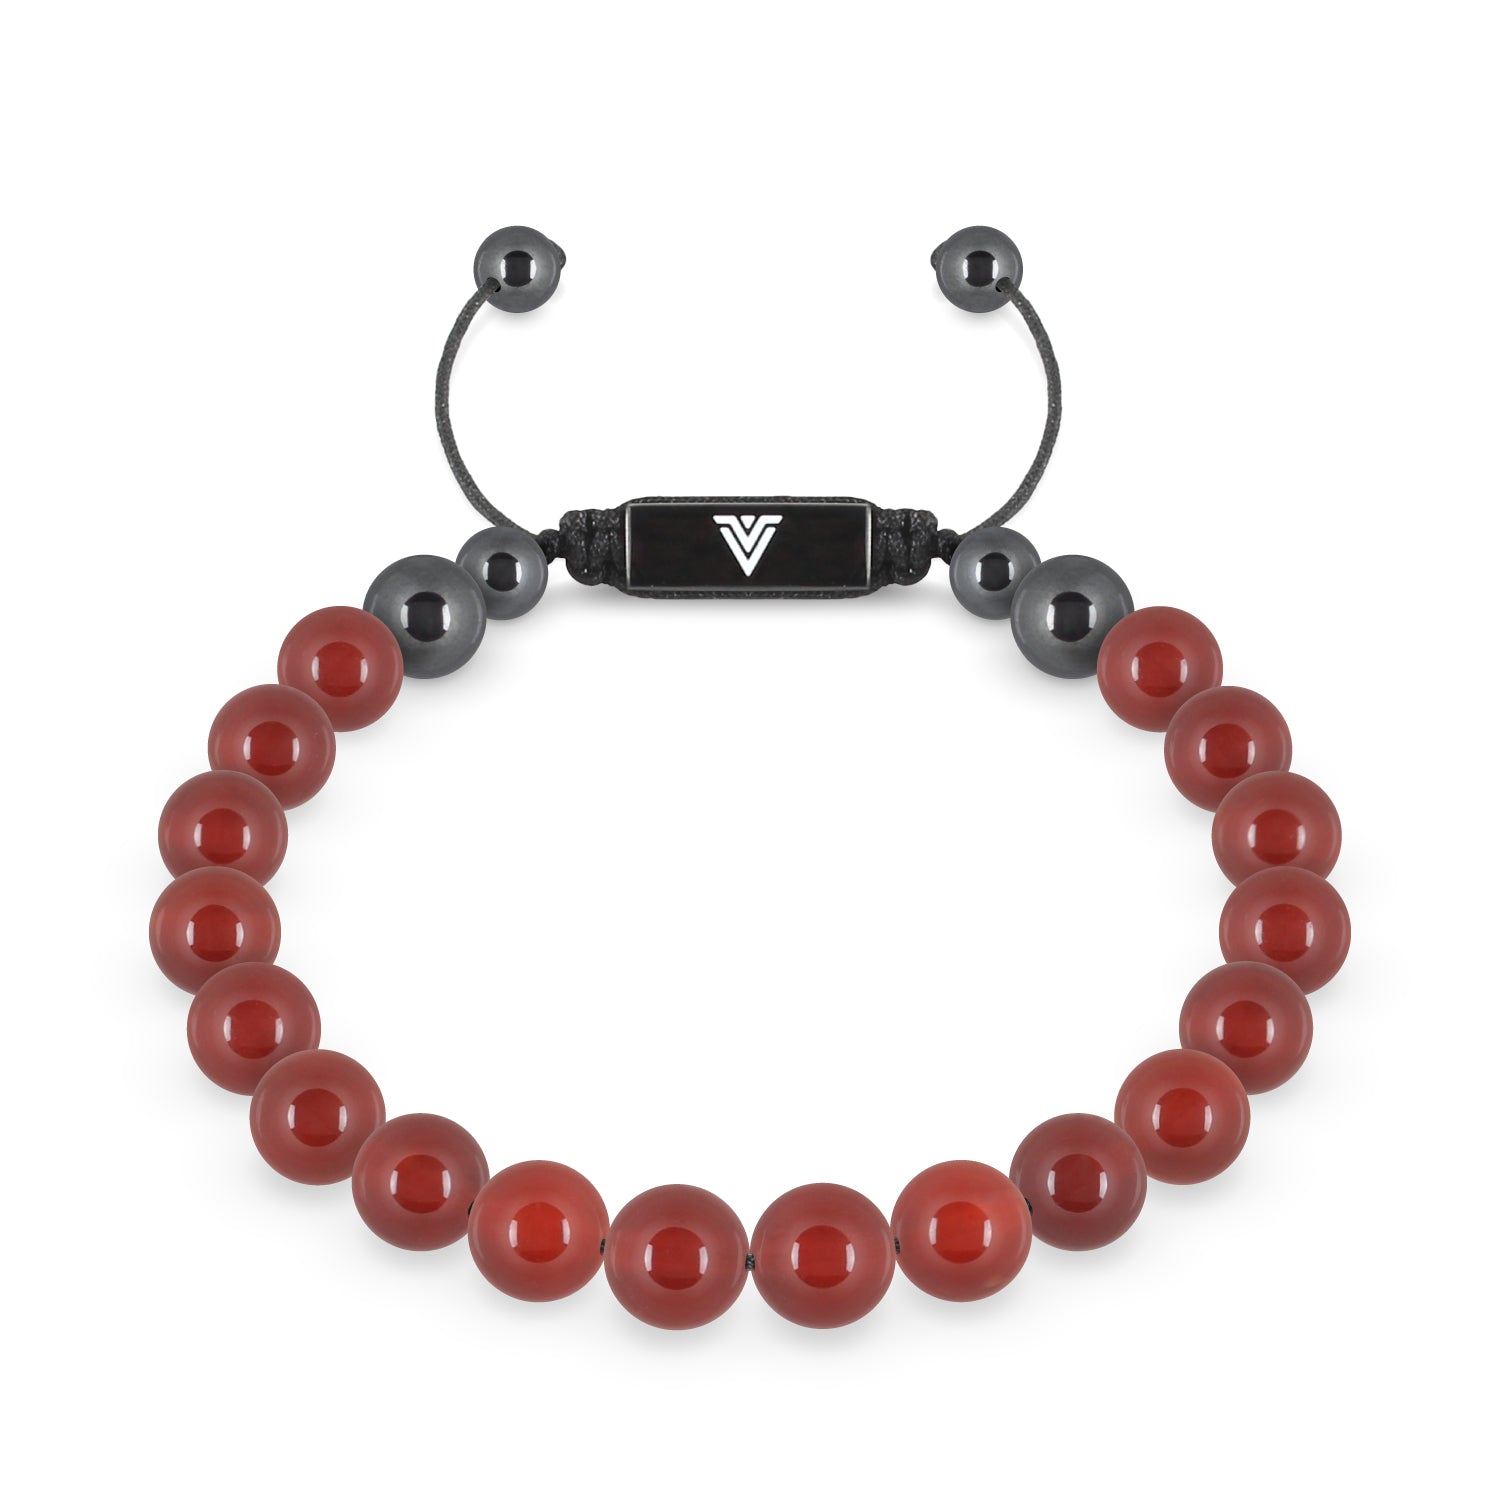 Front view of an 8mm Carnelian crystal beaded shamballa bracelet with black stainless steel logo bead made by Voltlin